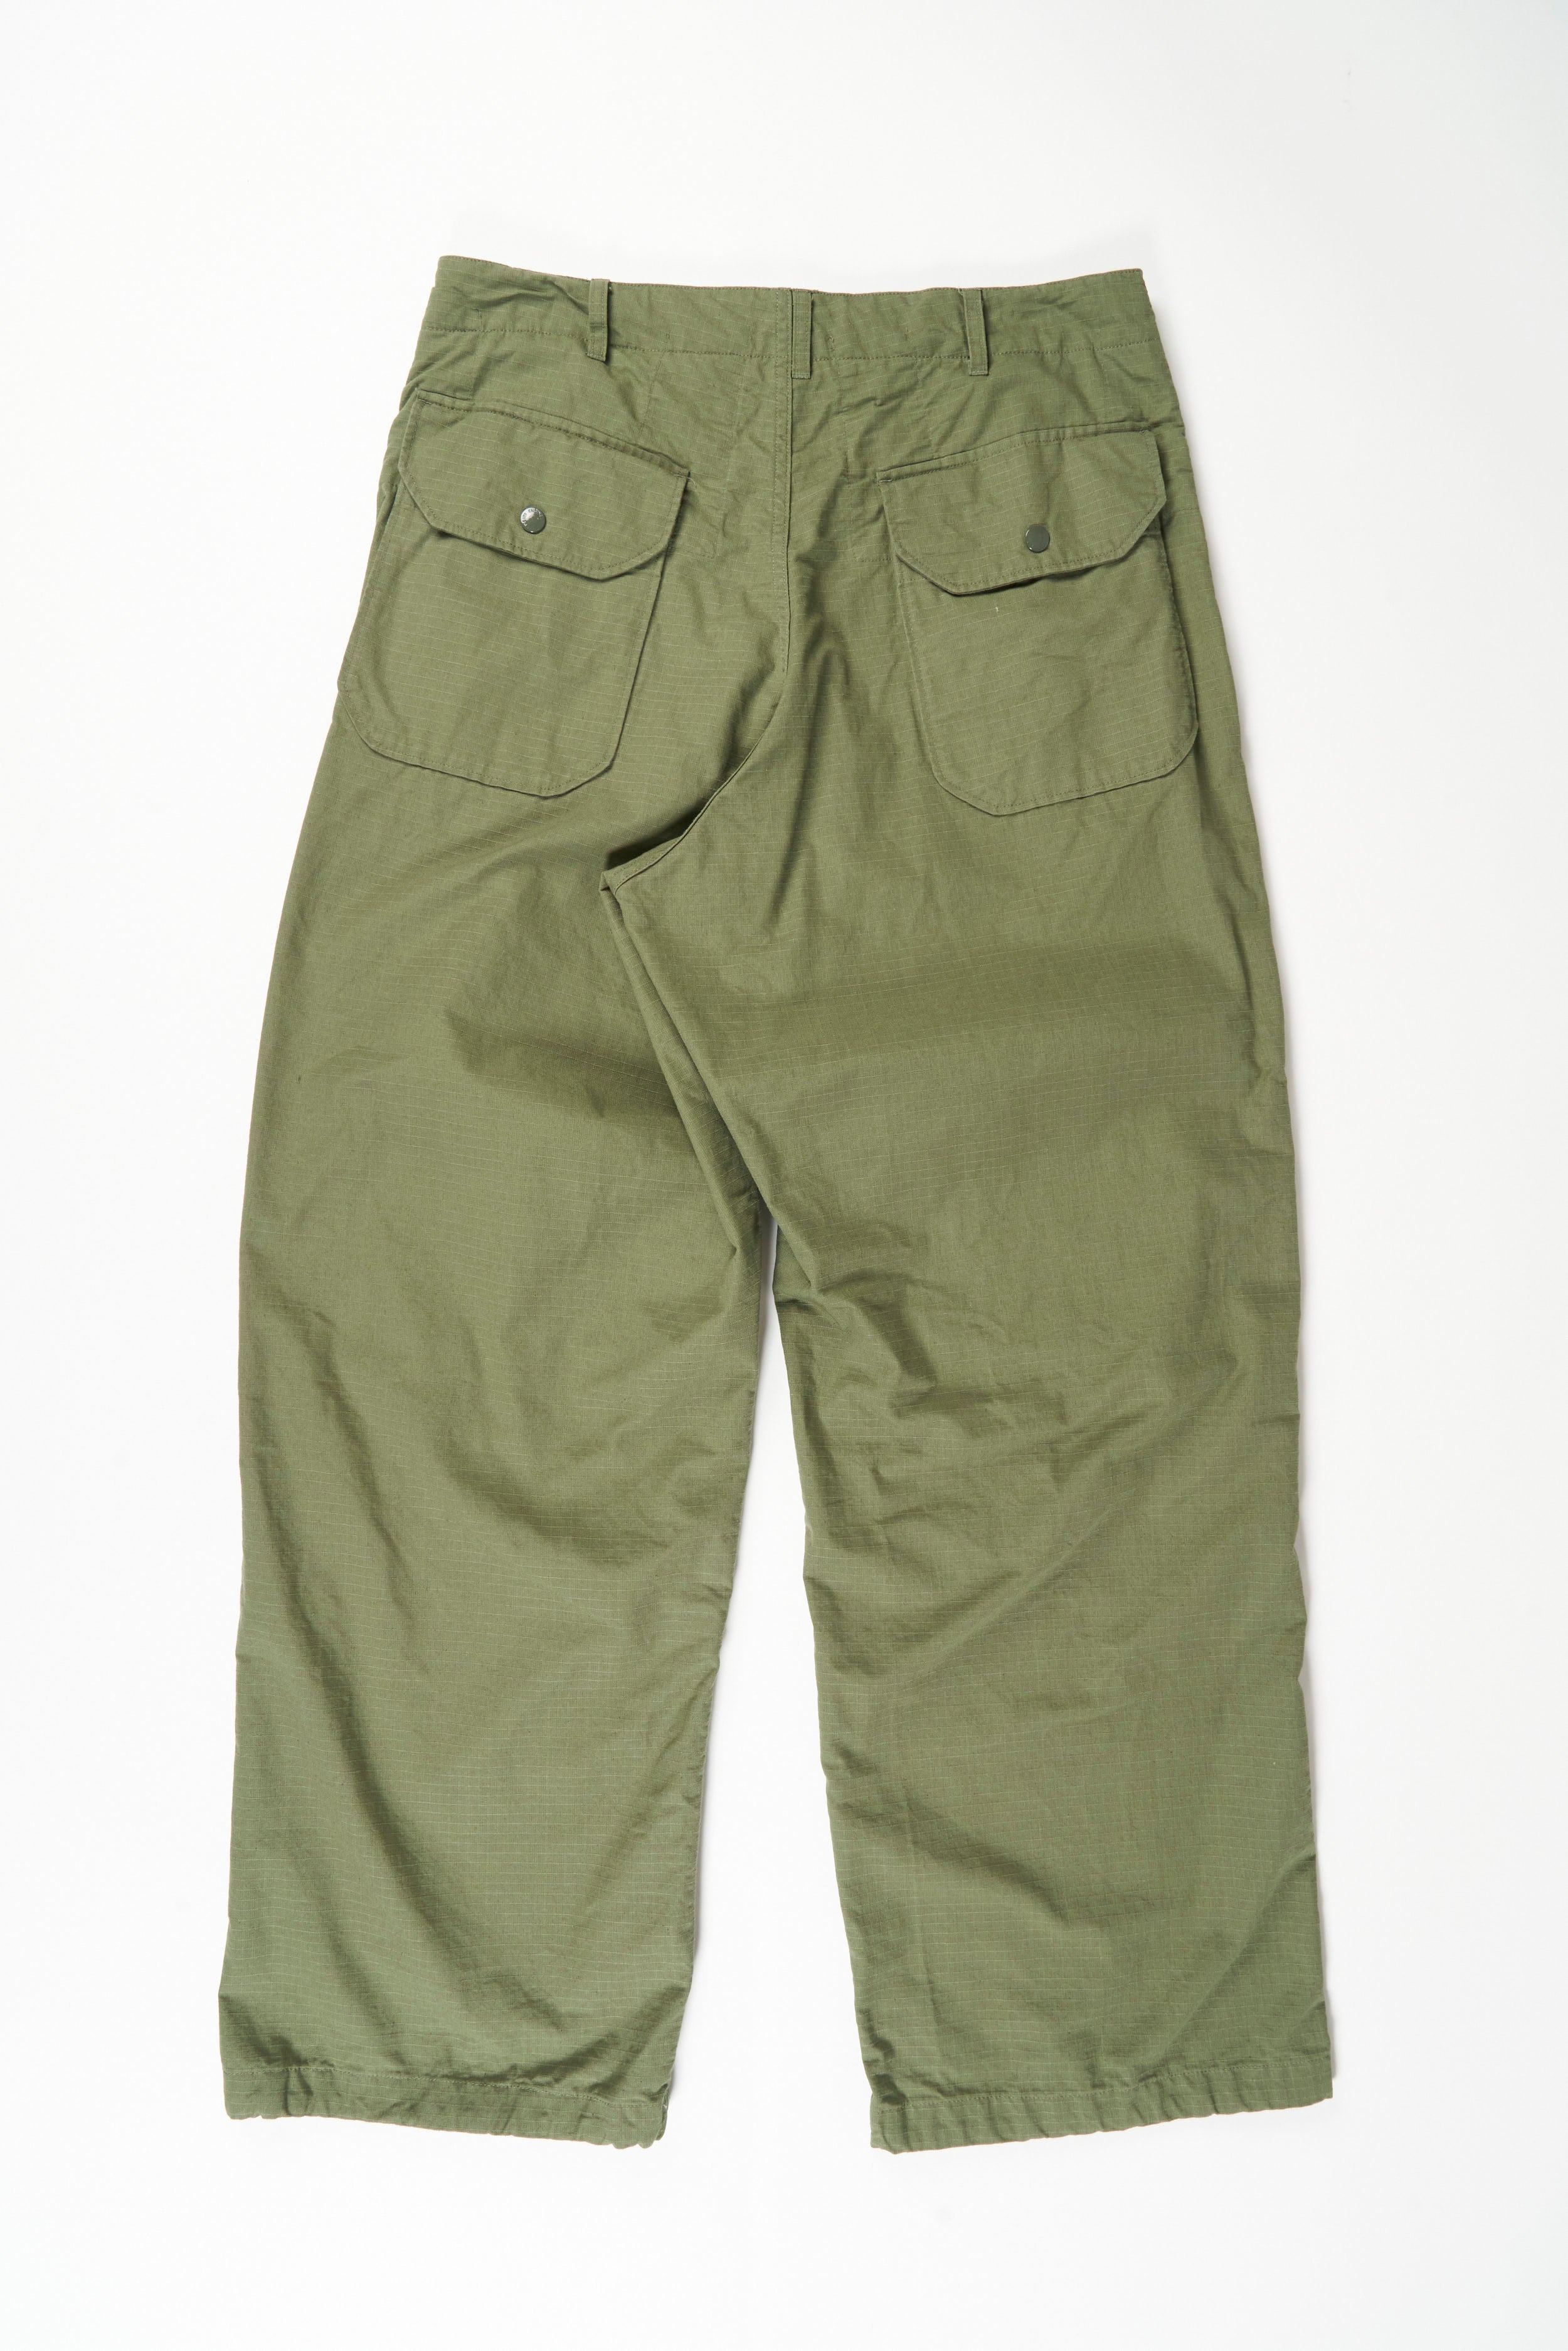 Engineered Garments Over Pant - Olive Cotton Ripstop – Totem 